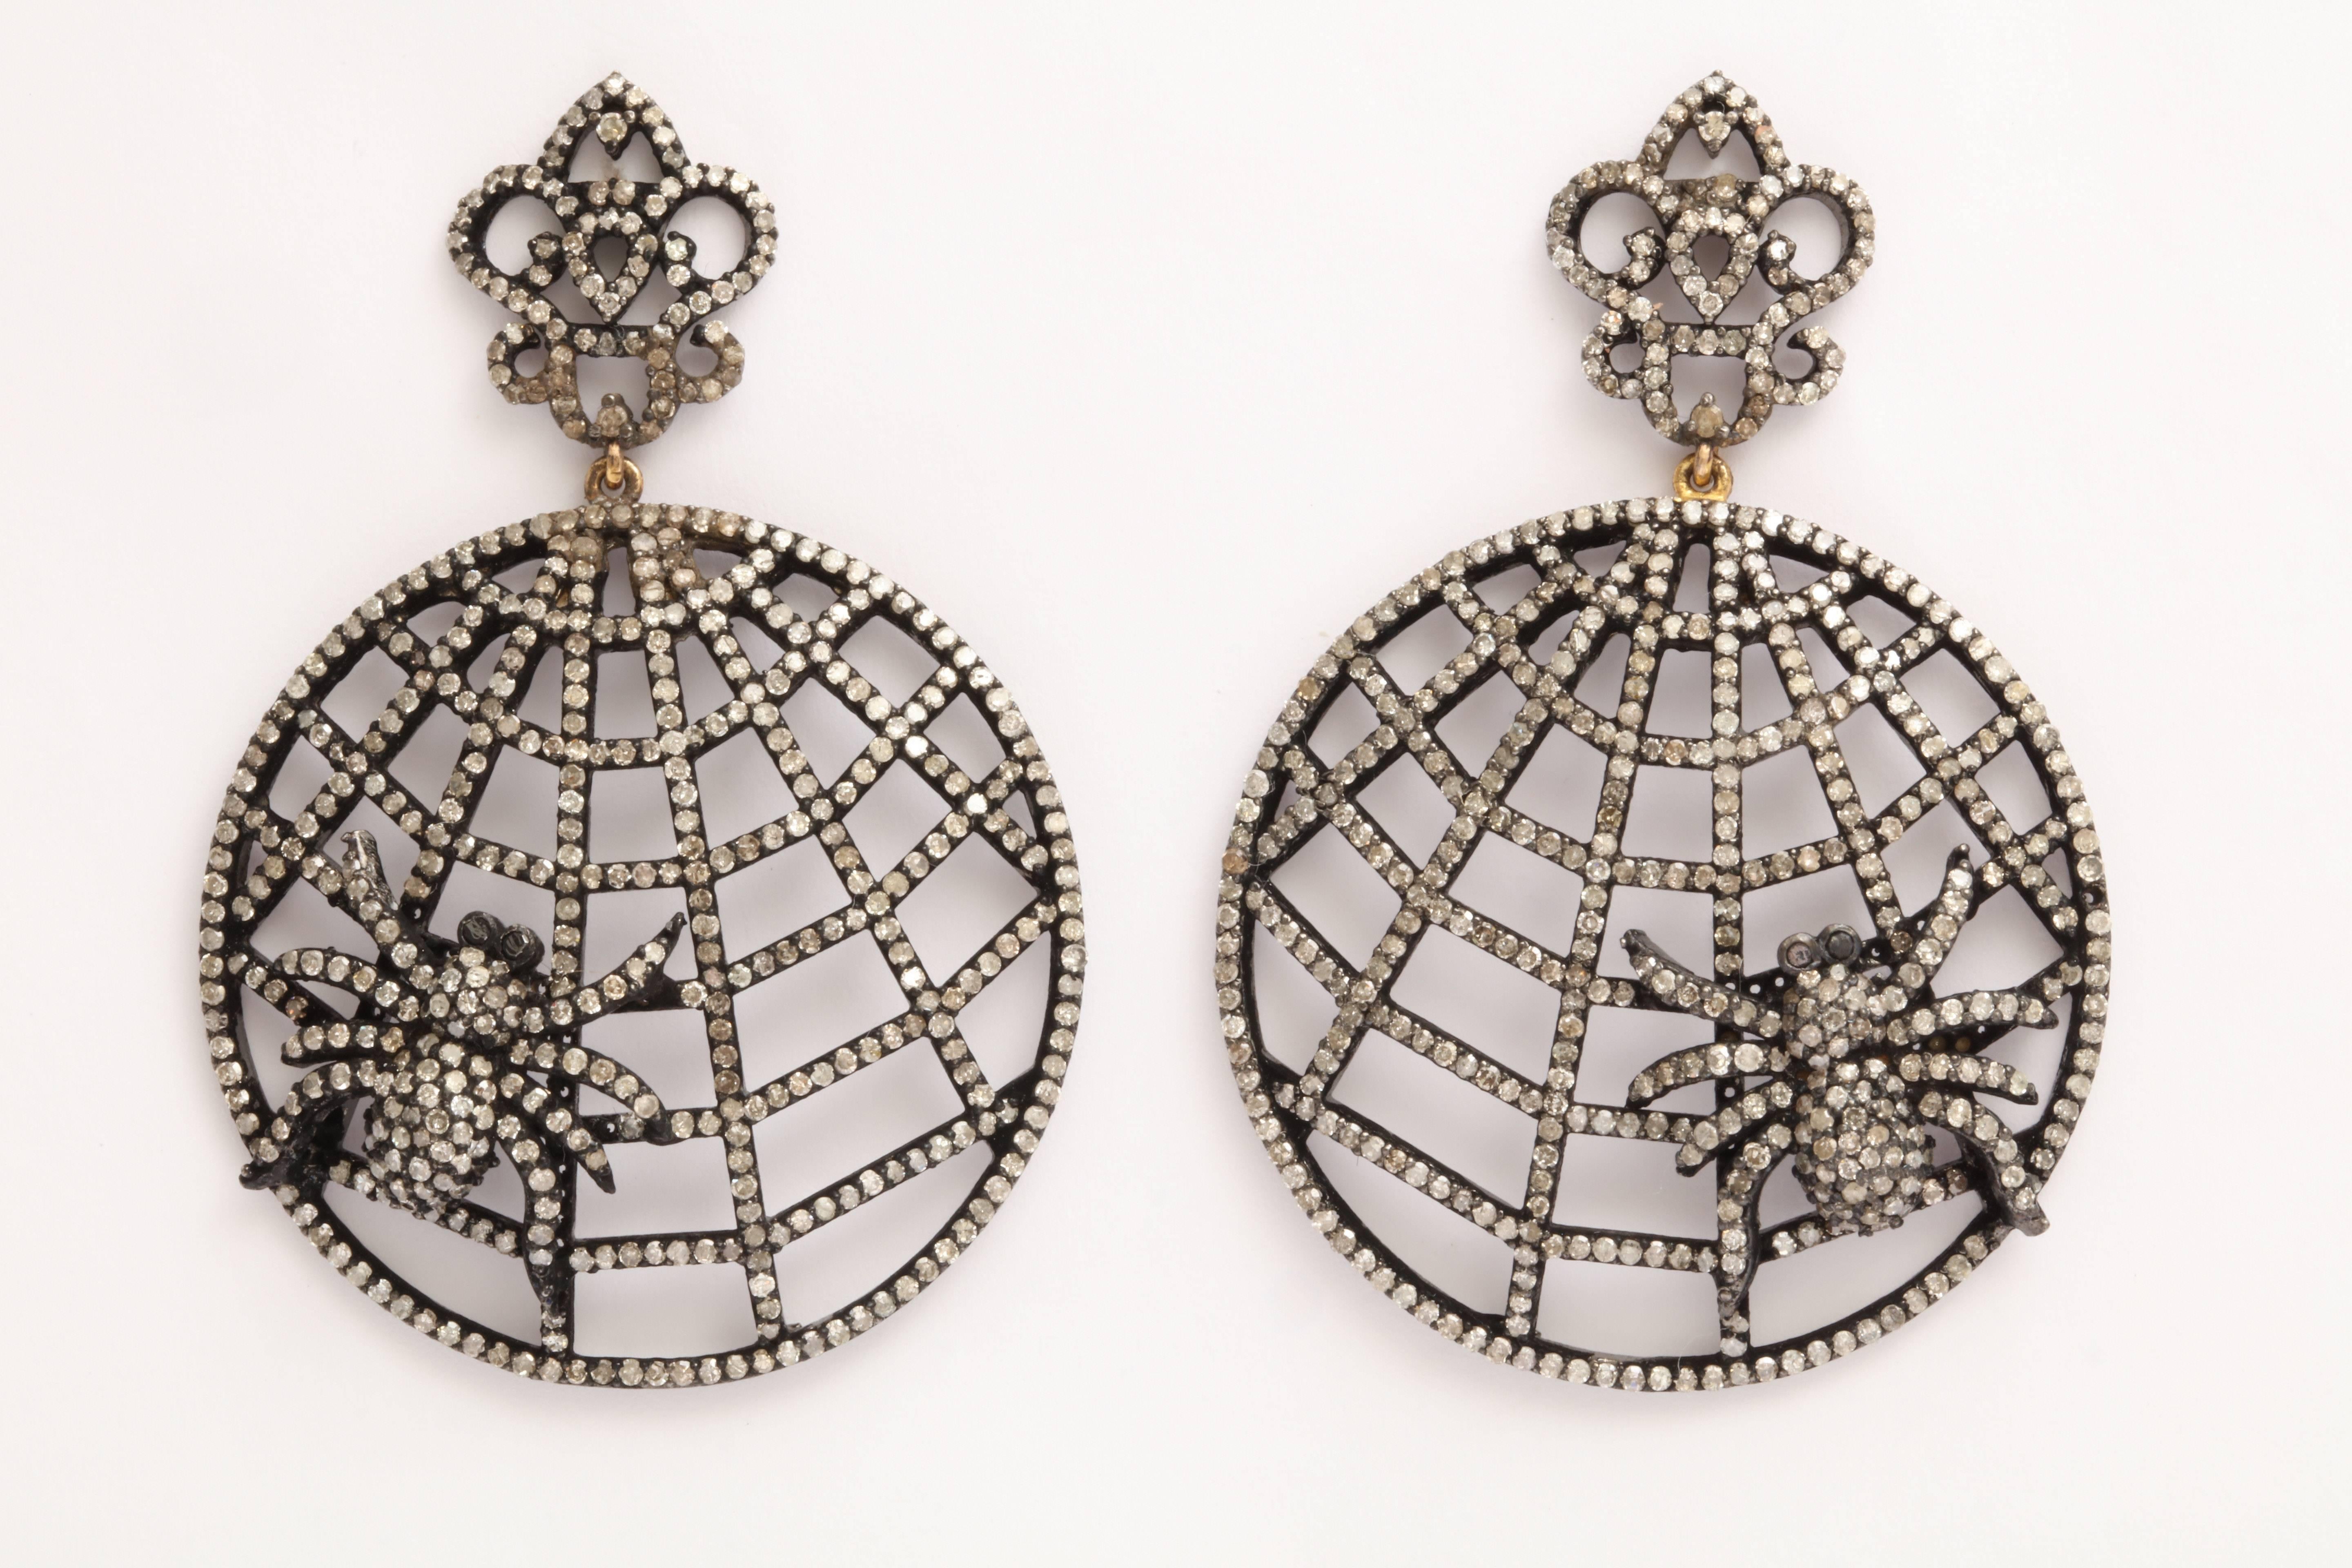 A pair of rhodium plated sterling silver and diamond spider web earrings. The webs are suspended from rhodium plated sterling silver and diamonds crowns.
There are approximately 5.45cts of diamonds.
Length: 2.20 inches
Width: 1.50 inches
Spider